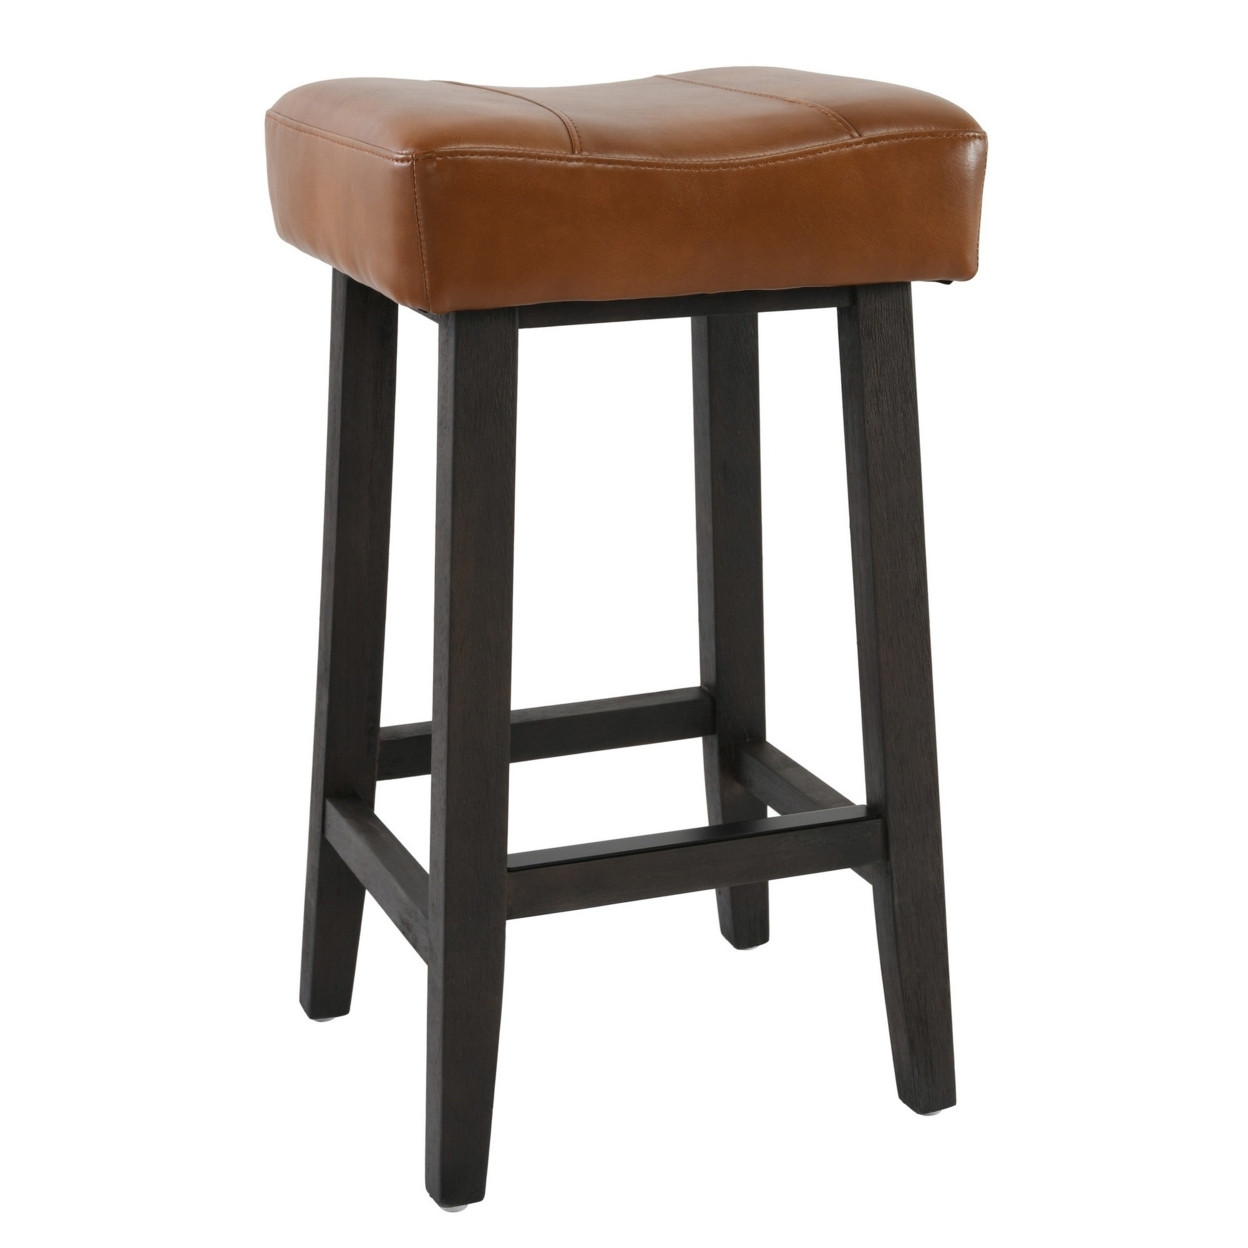 26 Inch Wooden Frame Leatherette Backless Counterstool, Brown- Saltoro Sherpi